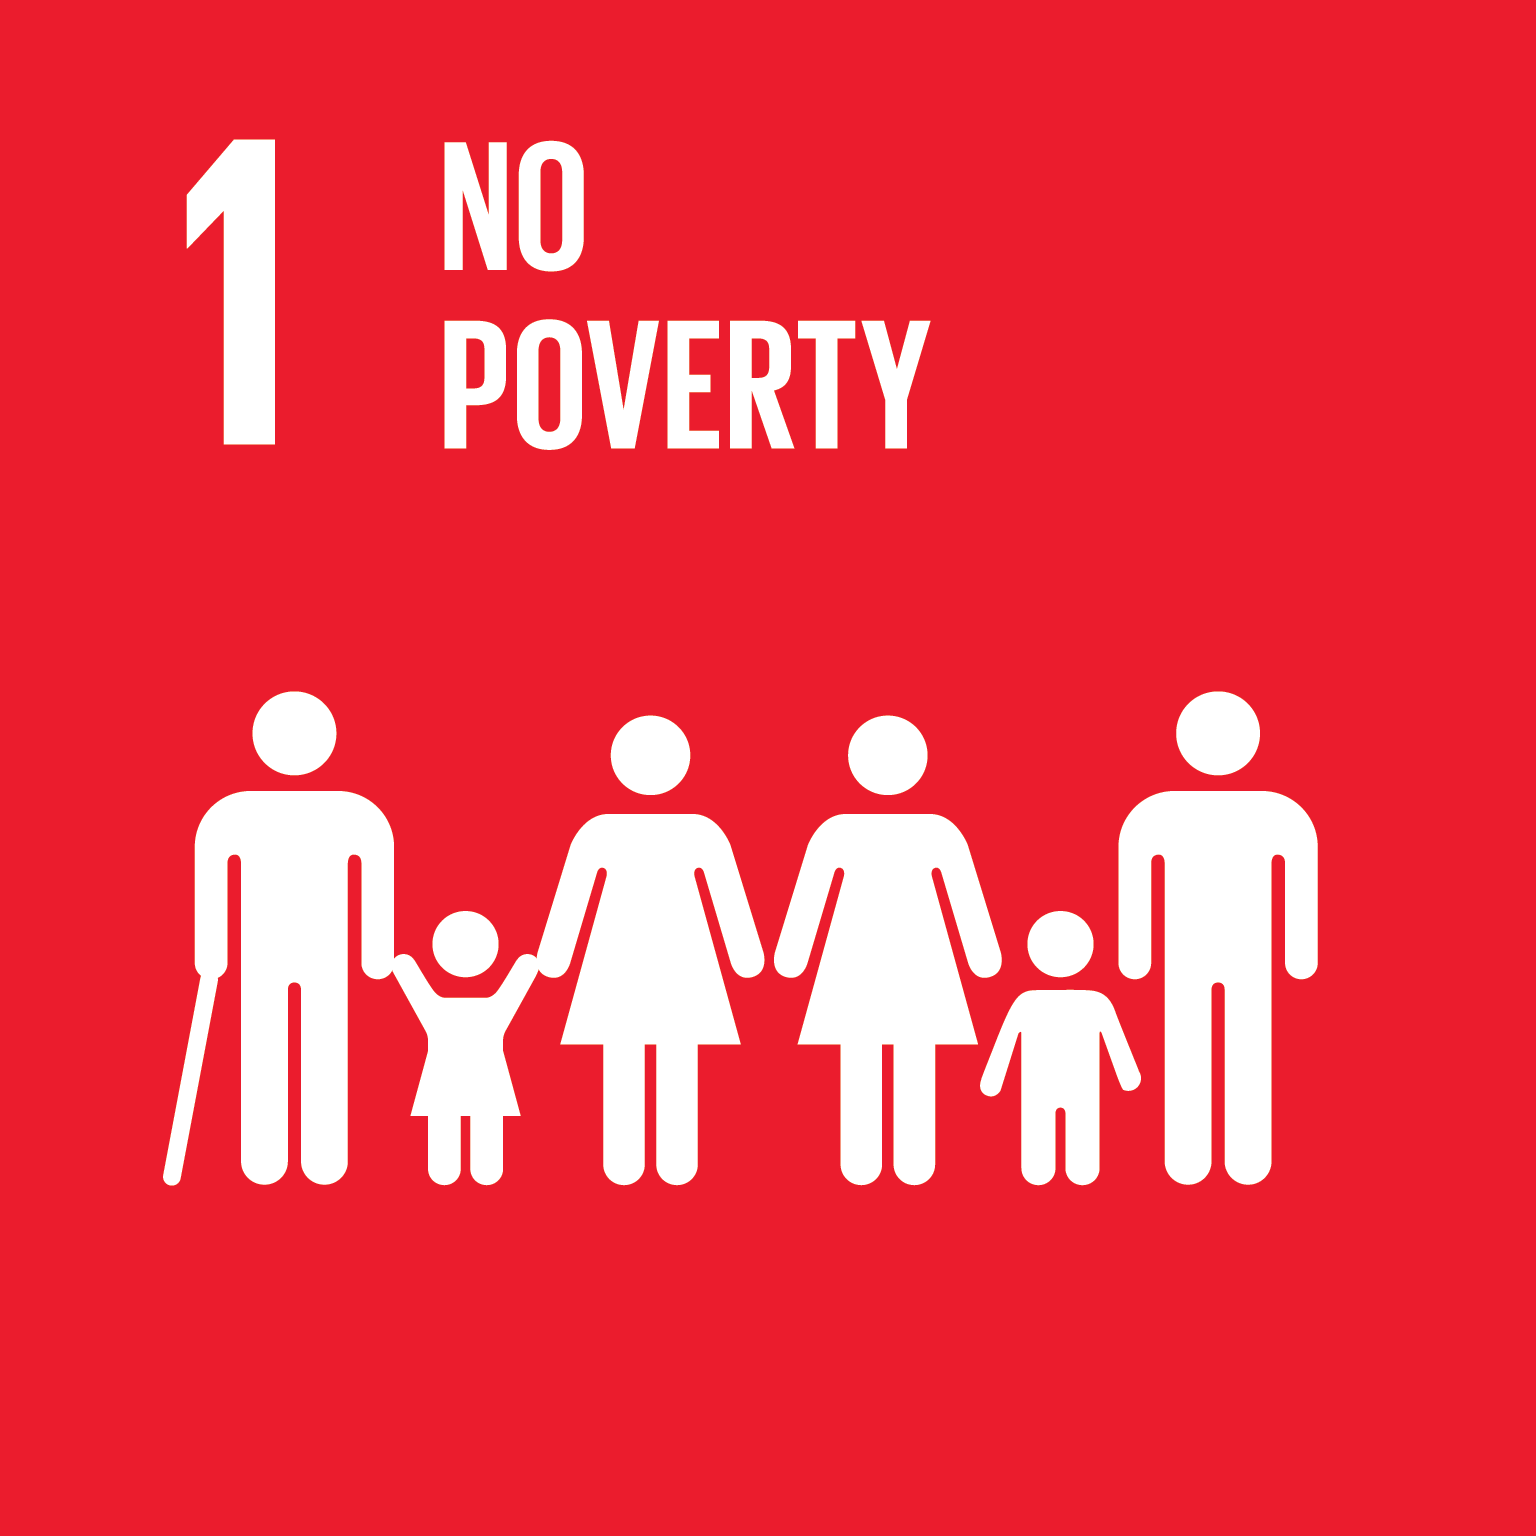 Goal 1: No Poverty - End poverty in all its forms everywhere